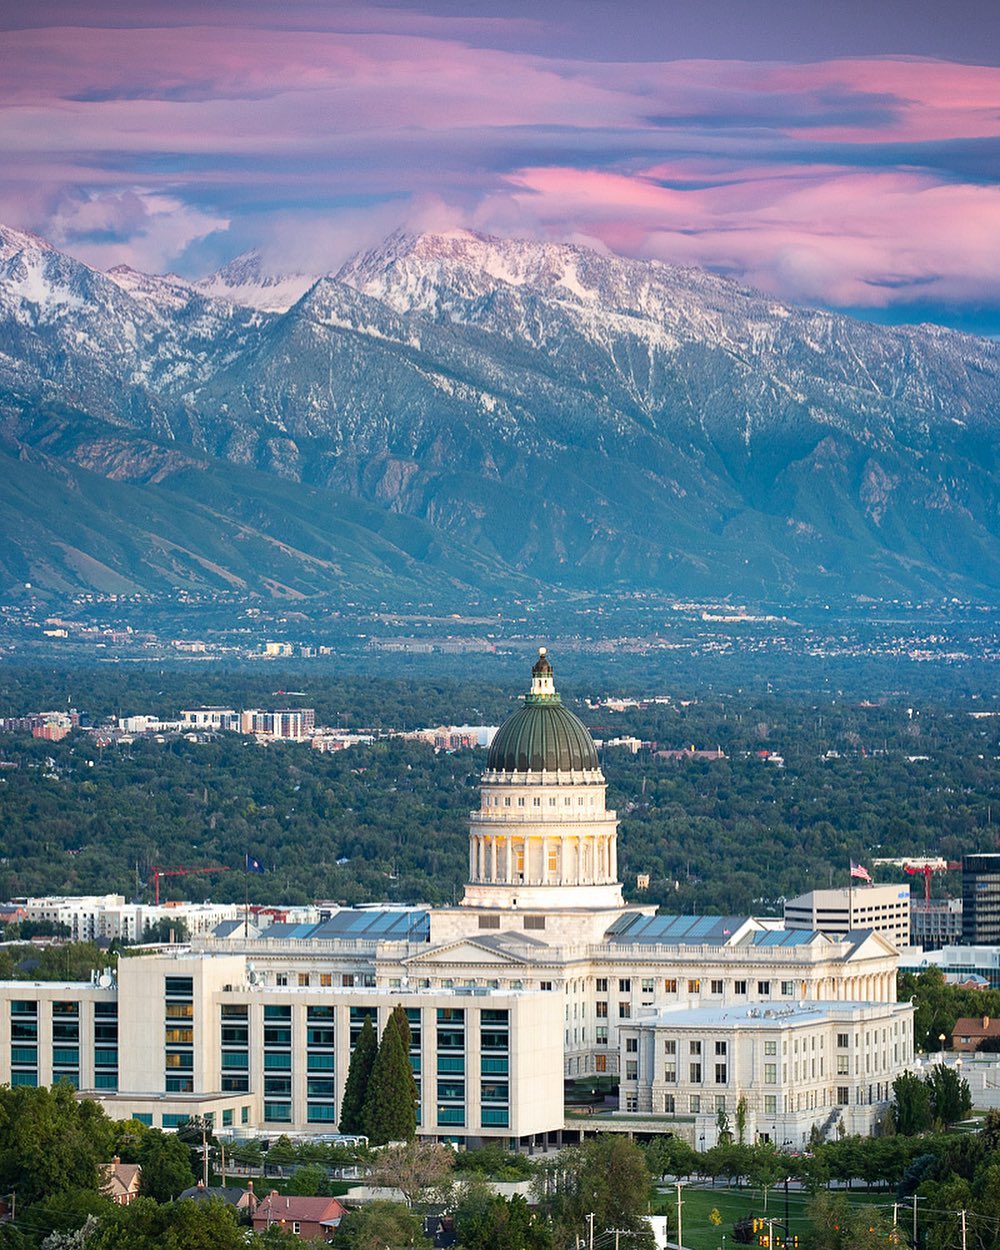 View of the Utah Capitol Building in Salt Lake City, UT with the Mountains in the Background. Photo by Instagram user @adambarkerphotography